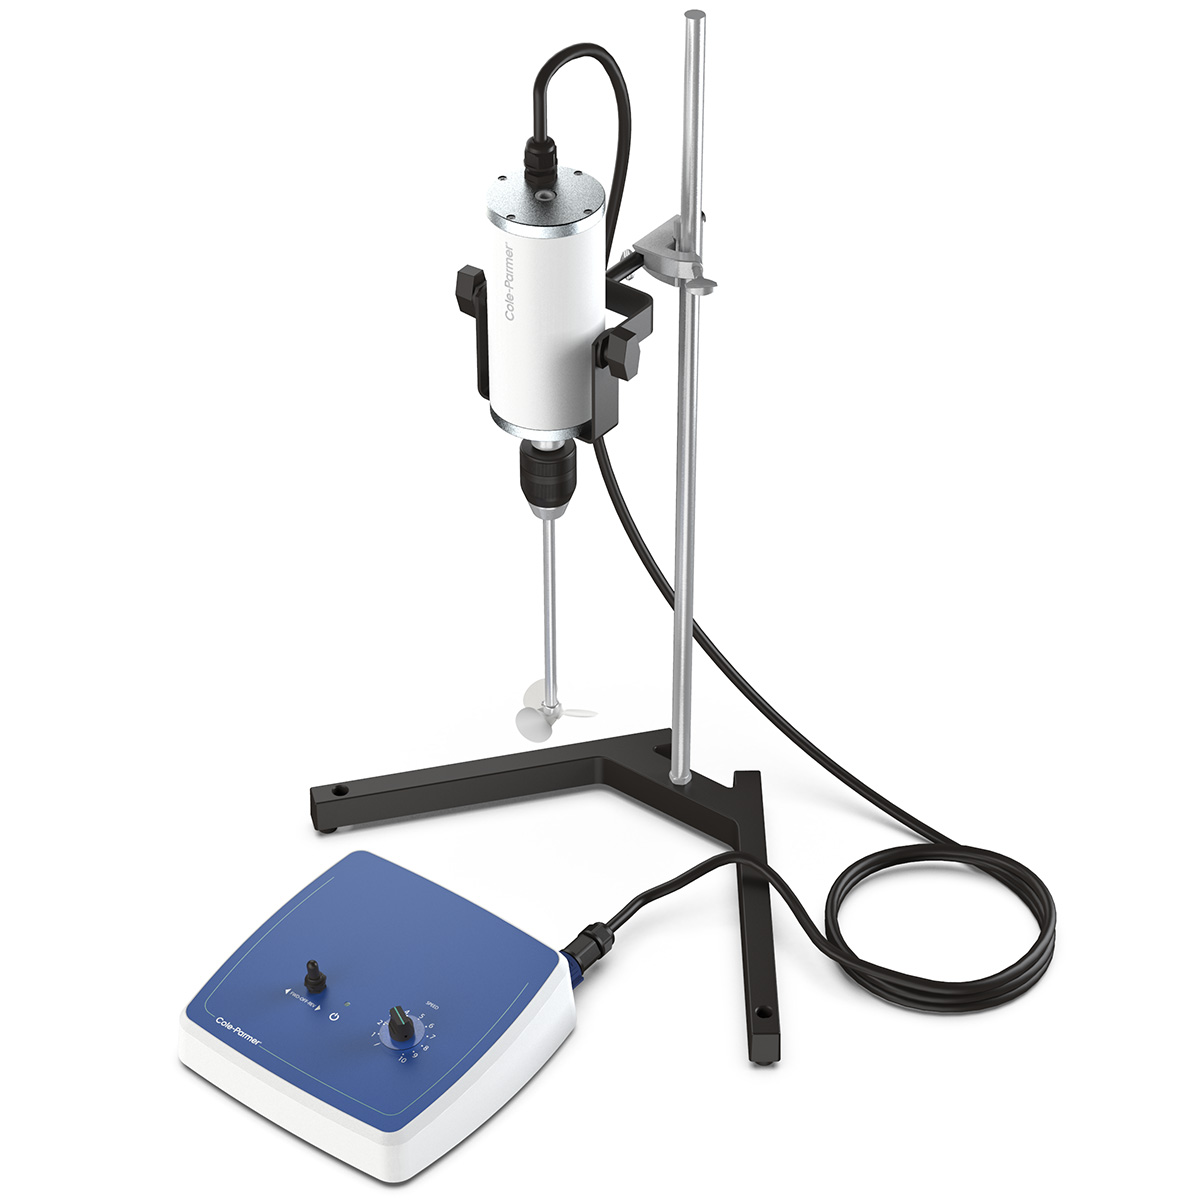 Cole-Parmer introduces overhead mixers for laboratory and manufacturing